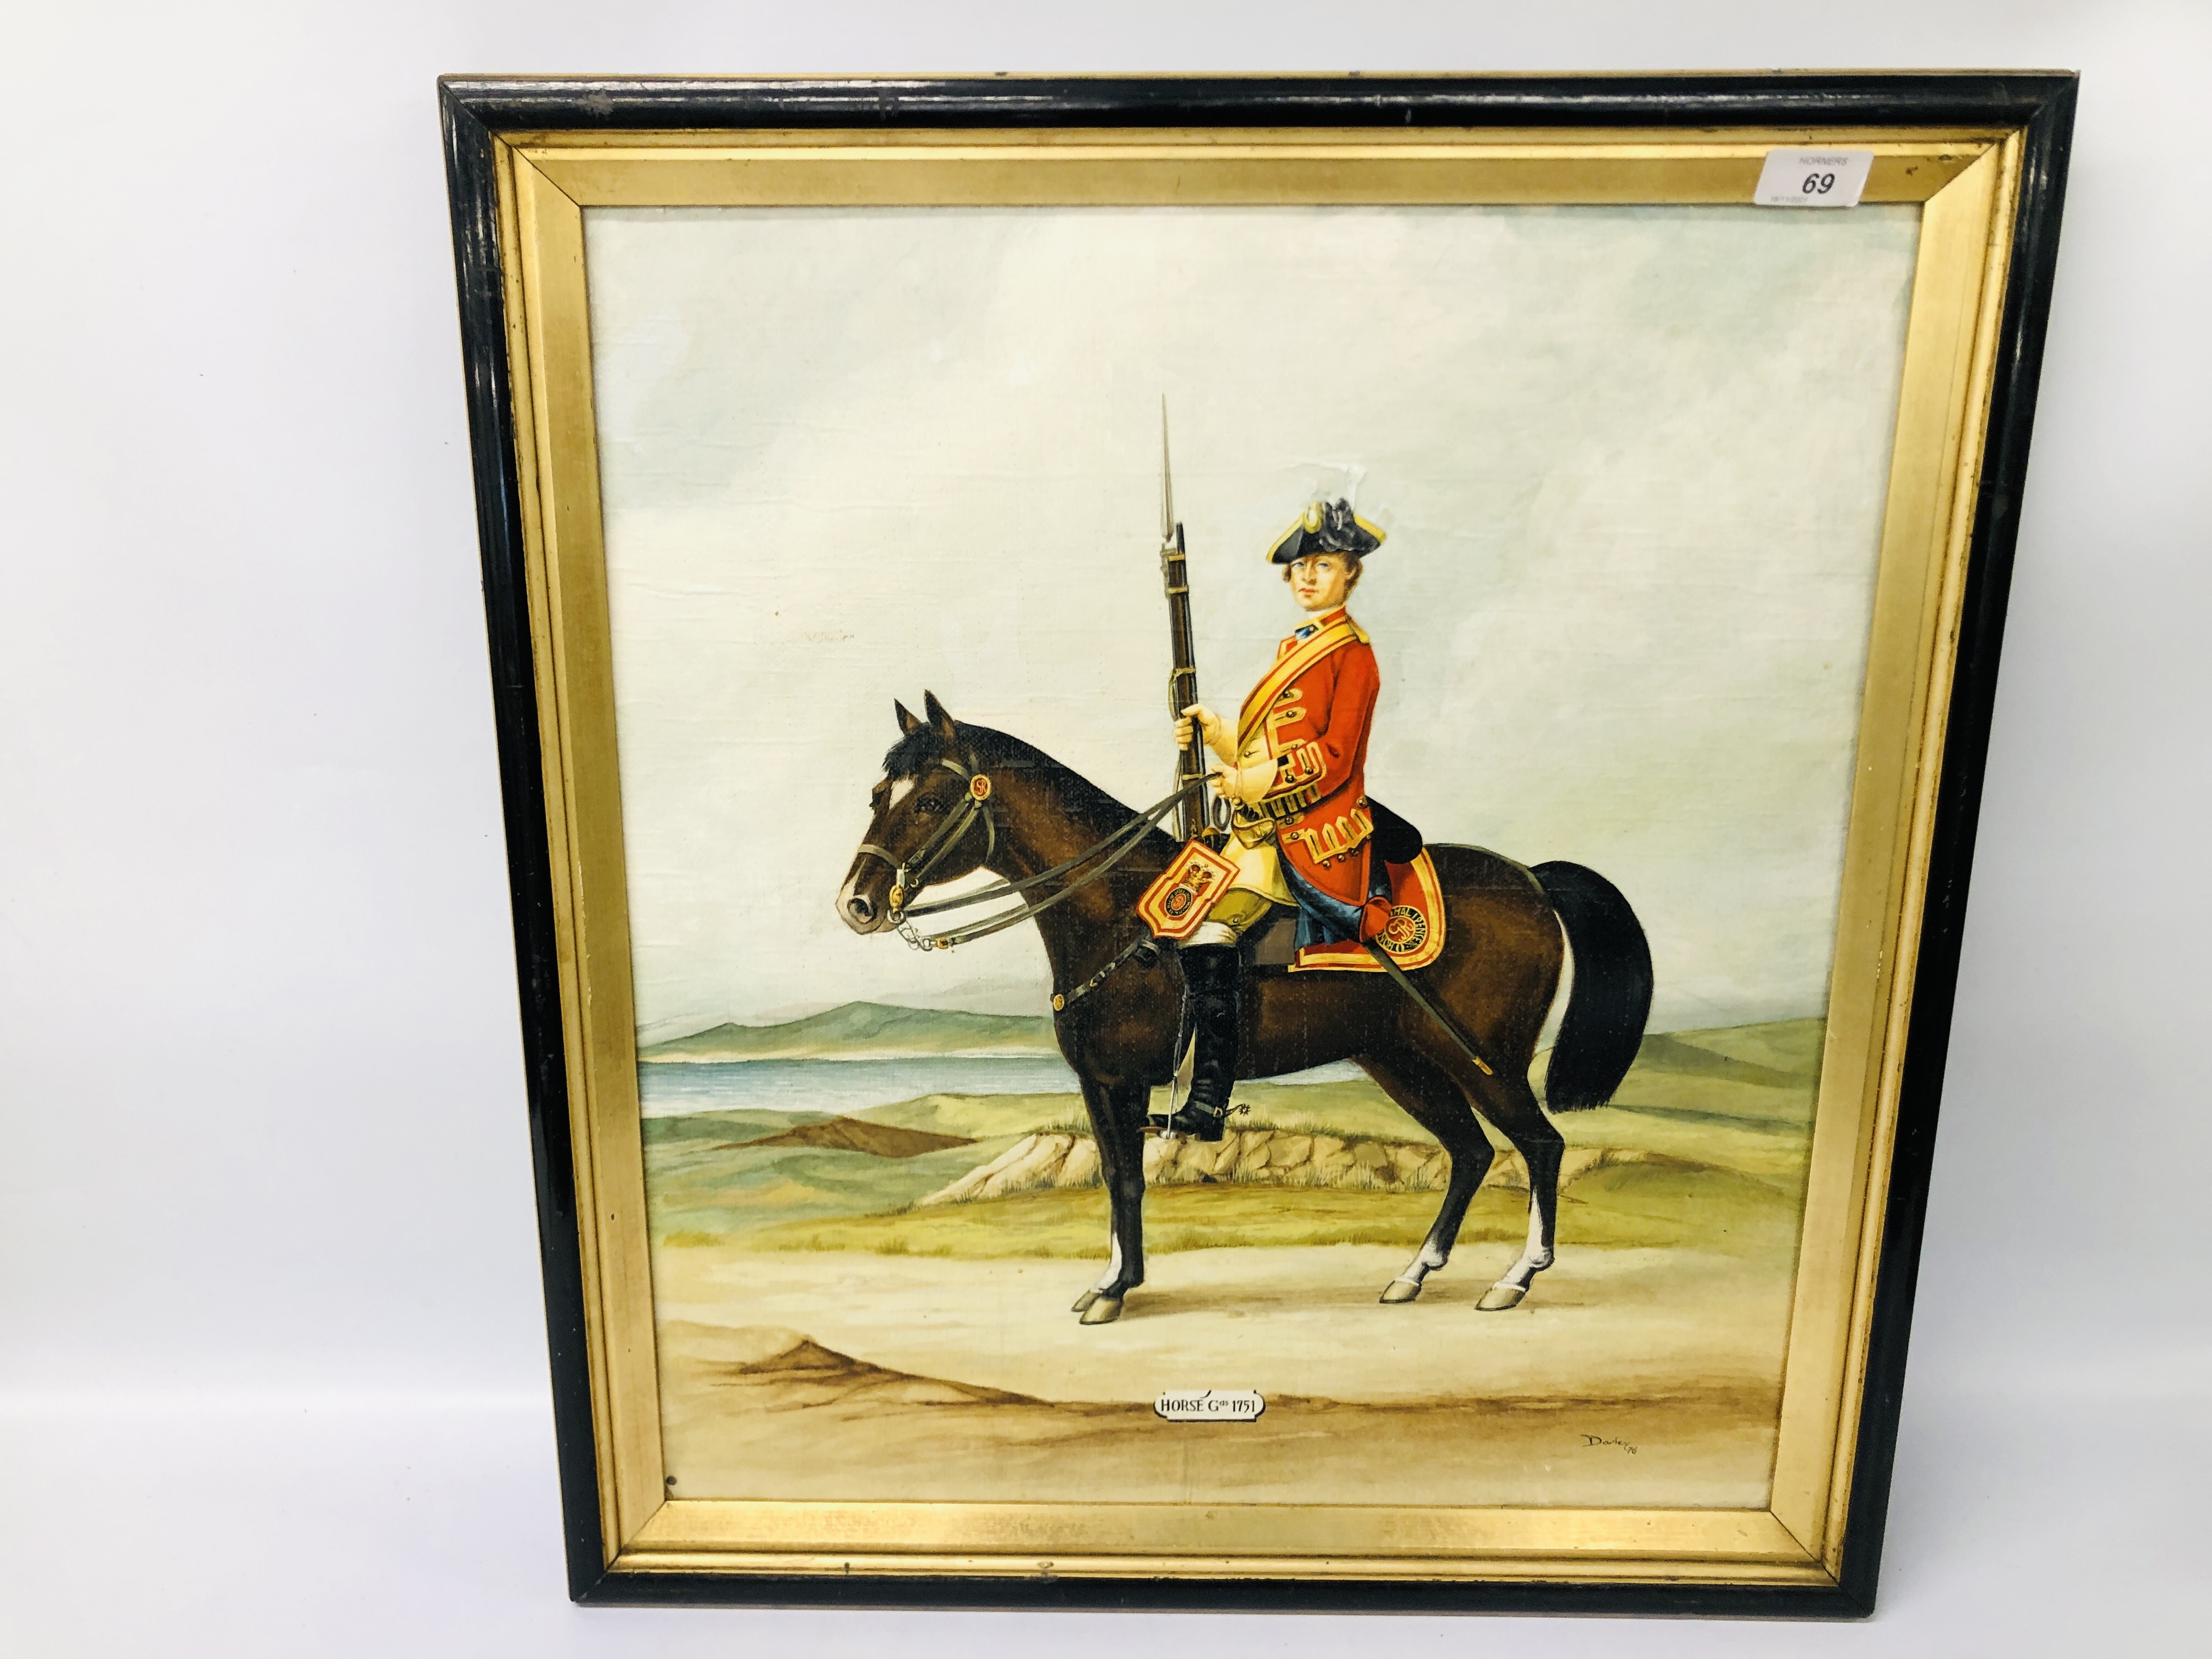 FRAMED OIL ON CANVAS, HORSE GUARDS 1751 BEARING SIGNATURE DARLEY DATED 76 - W 50CM. H 56CM.